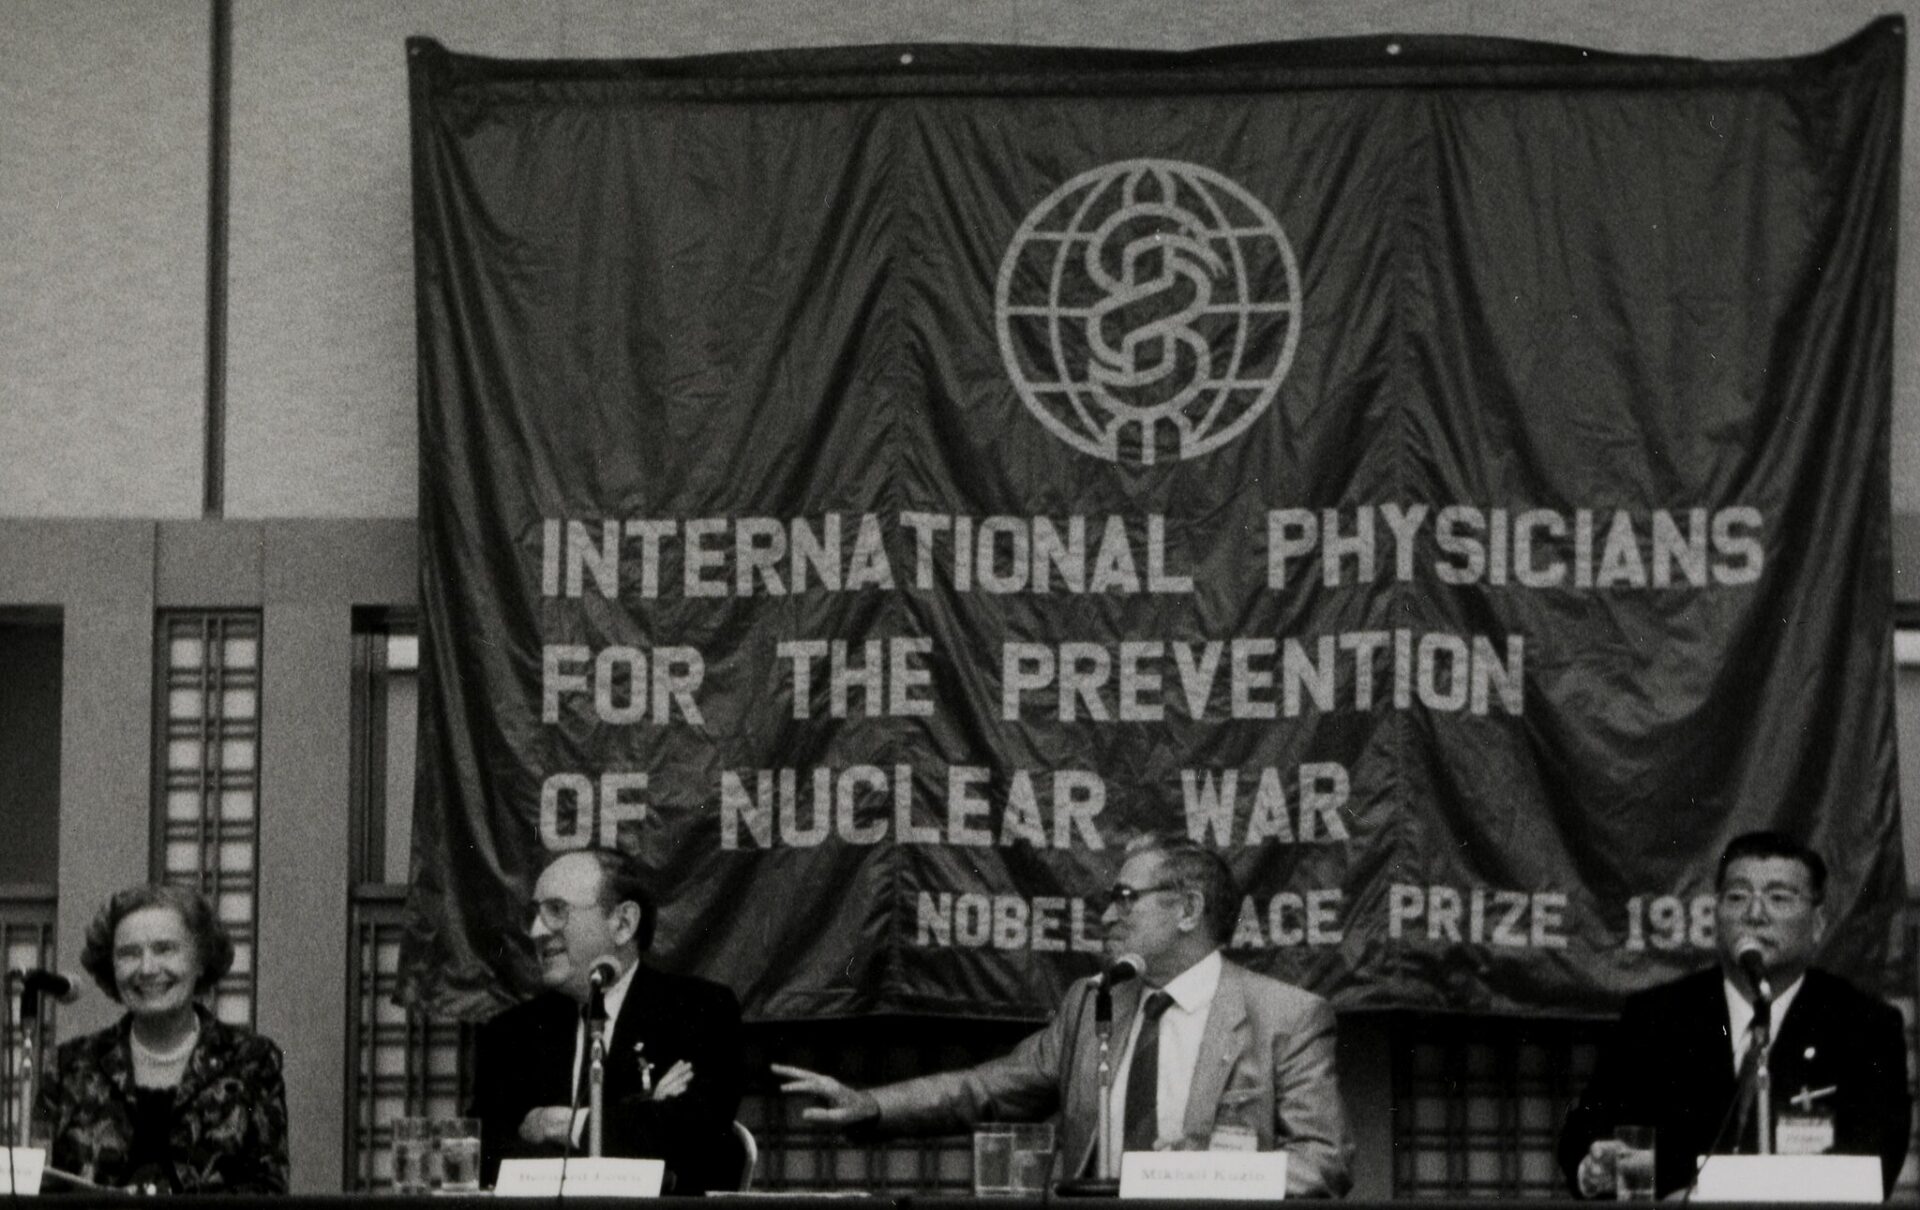 Medact was formed in 1992 as a merger between the Medical Campaign Against Nuclear Weapons (MCANW) and the Medical Association for the Prevention of War (MAPW) (Wellcome Images via Wikimedia Commons)